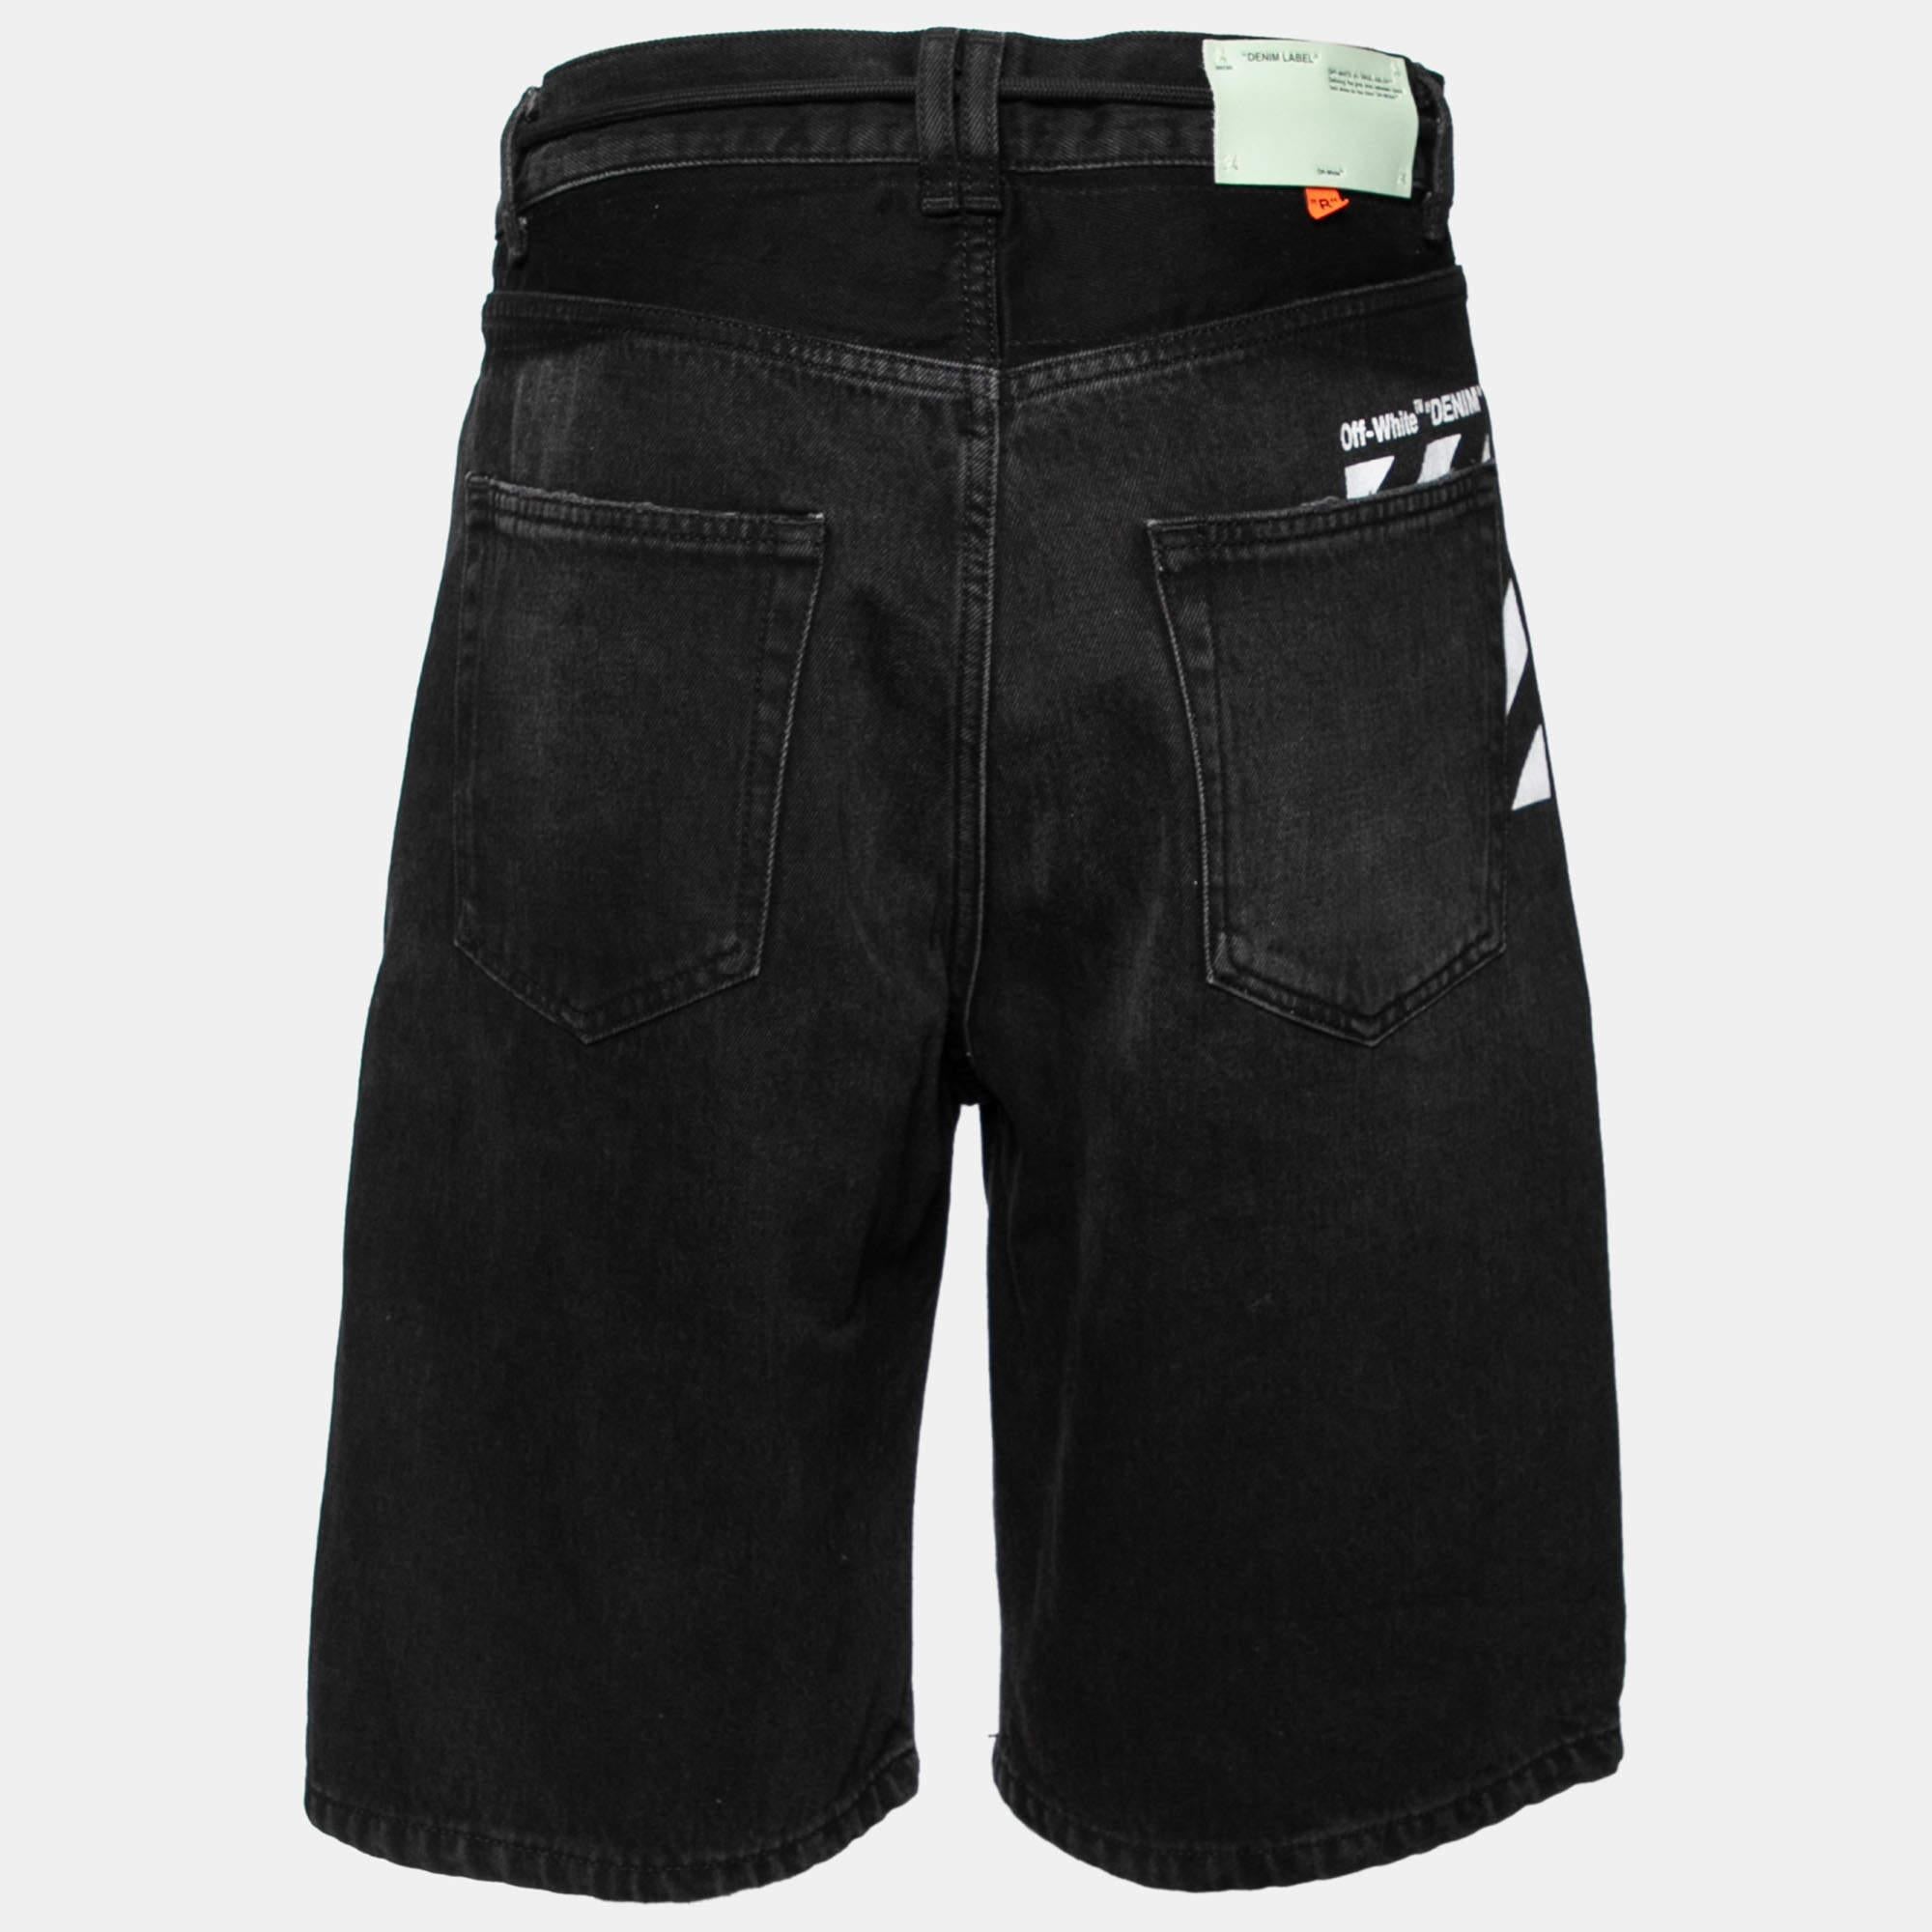 Update your wardrobe with these shorts from Off-White. Designed for a comfy fit and stylish look, these black shorts have a zipper & drawstring detail, five pockets, and branding elements. Wear yours with a comfortable plain T-shirt, sneakers, and